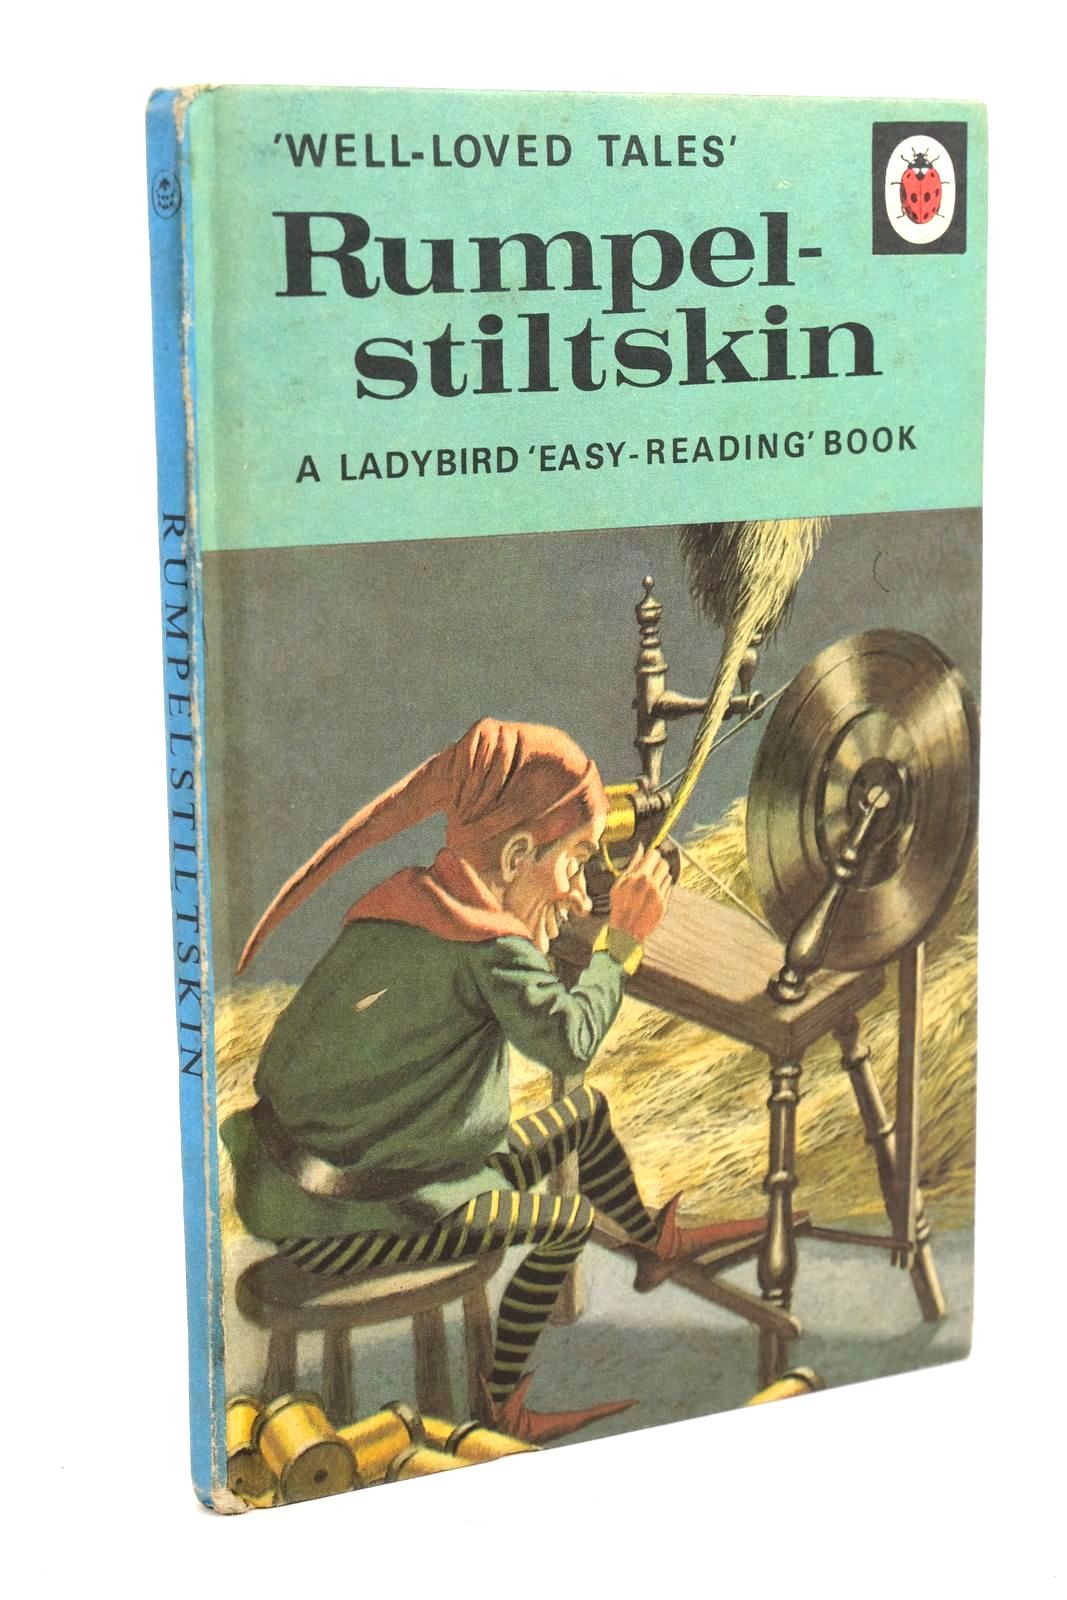 Photo of RUMPELSTILTSKIN written by Southgate, Vera illustrated by Winter, Eric published by Wills & Hepworth Ltd. (STOCK CODE: 1321455)  for sale by Stella & Rose's Books